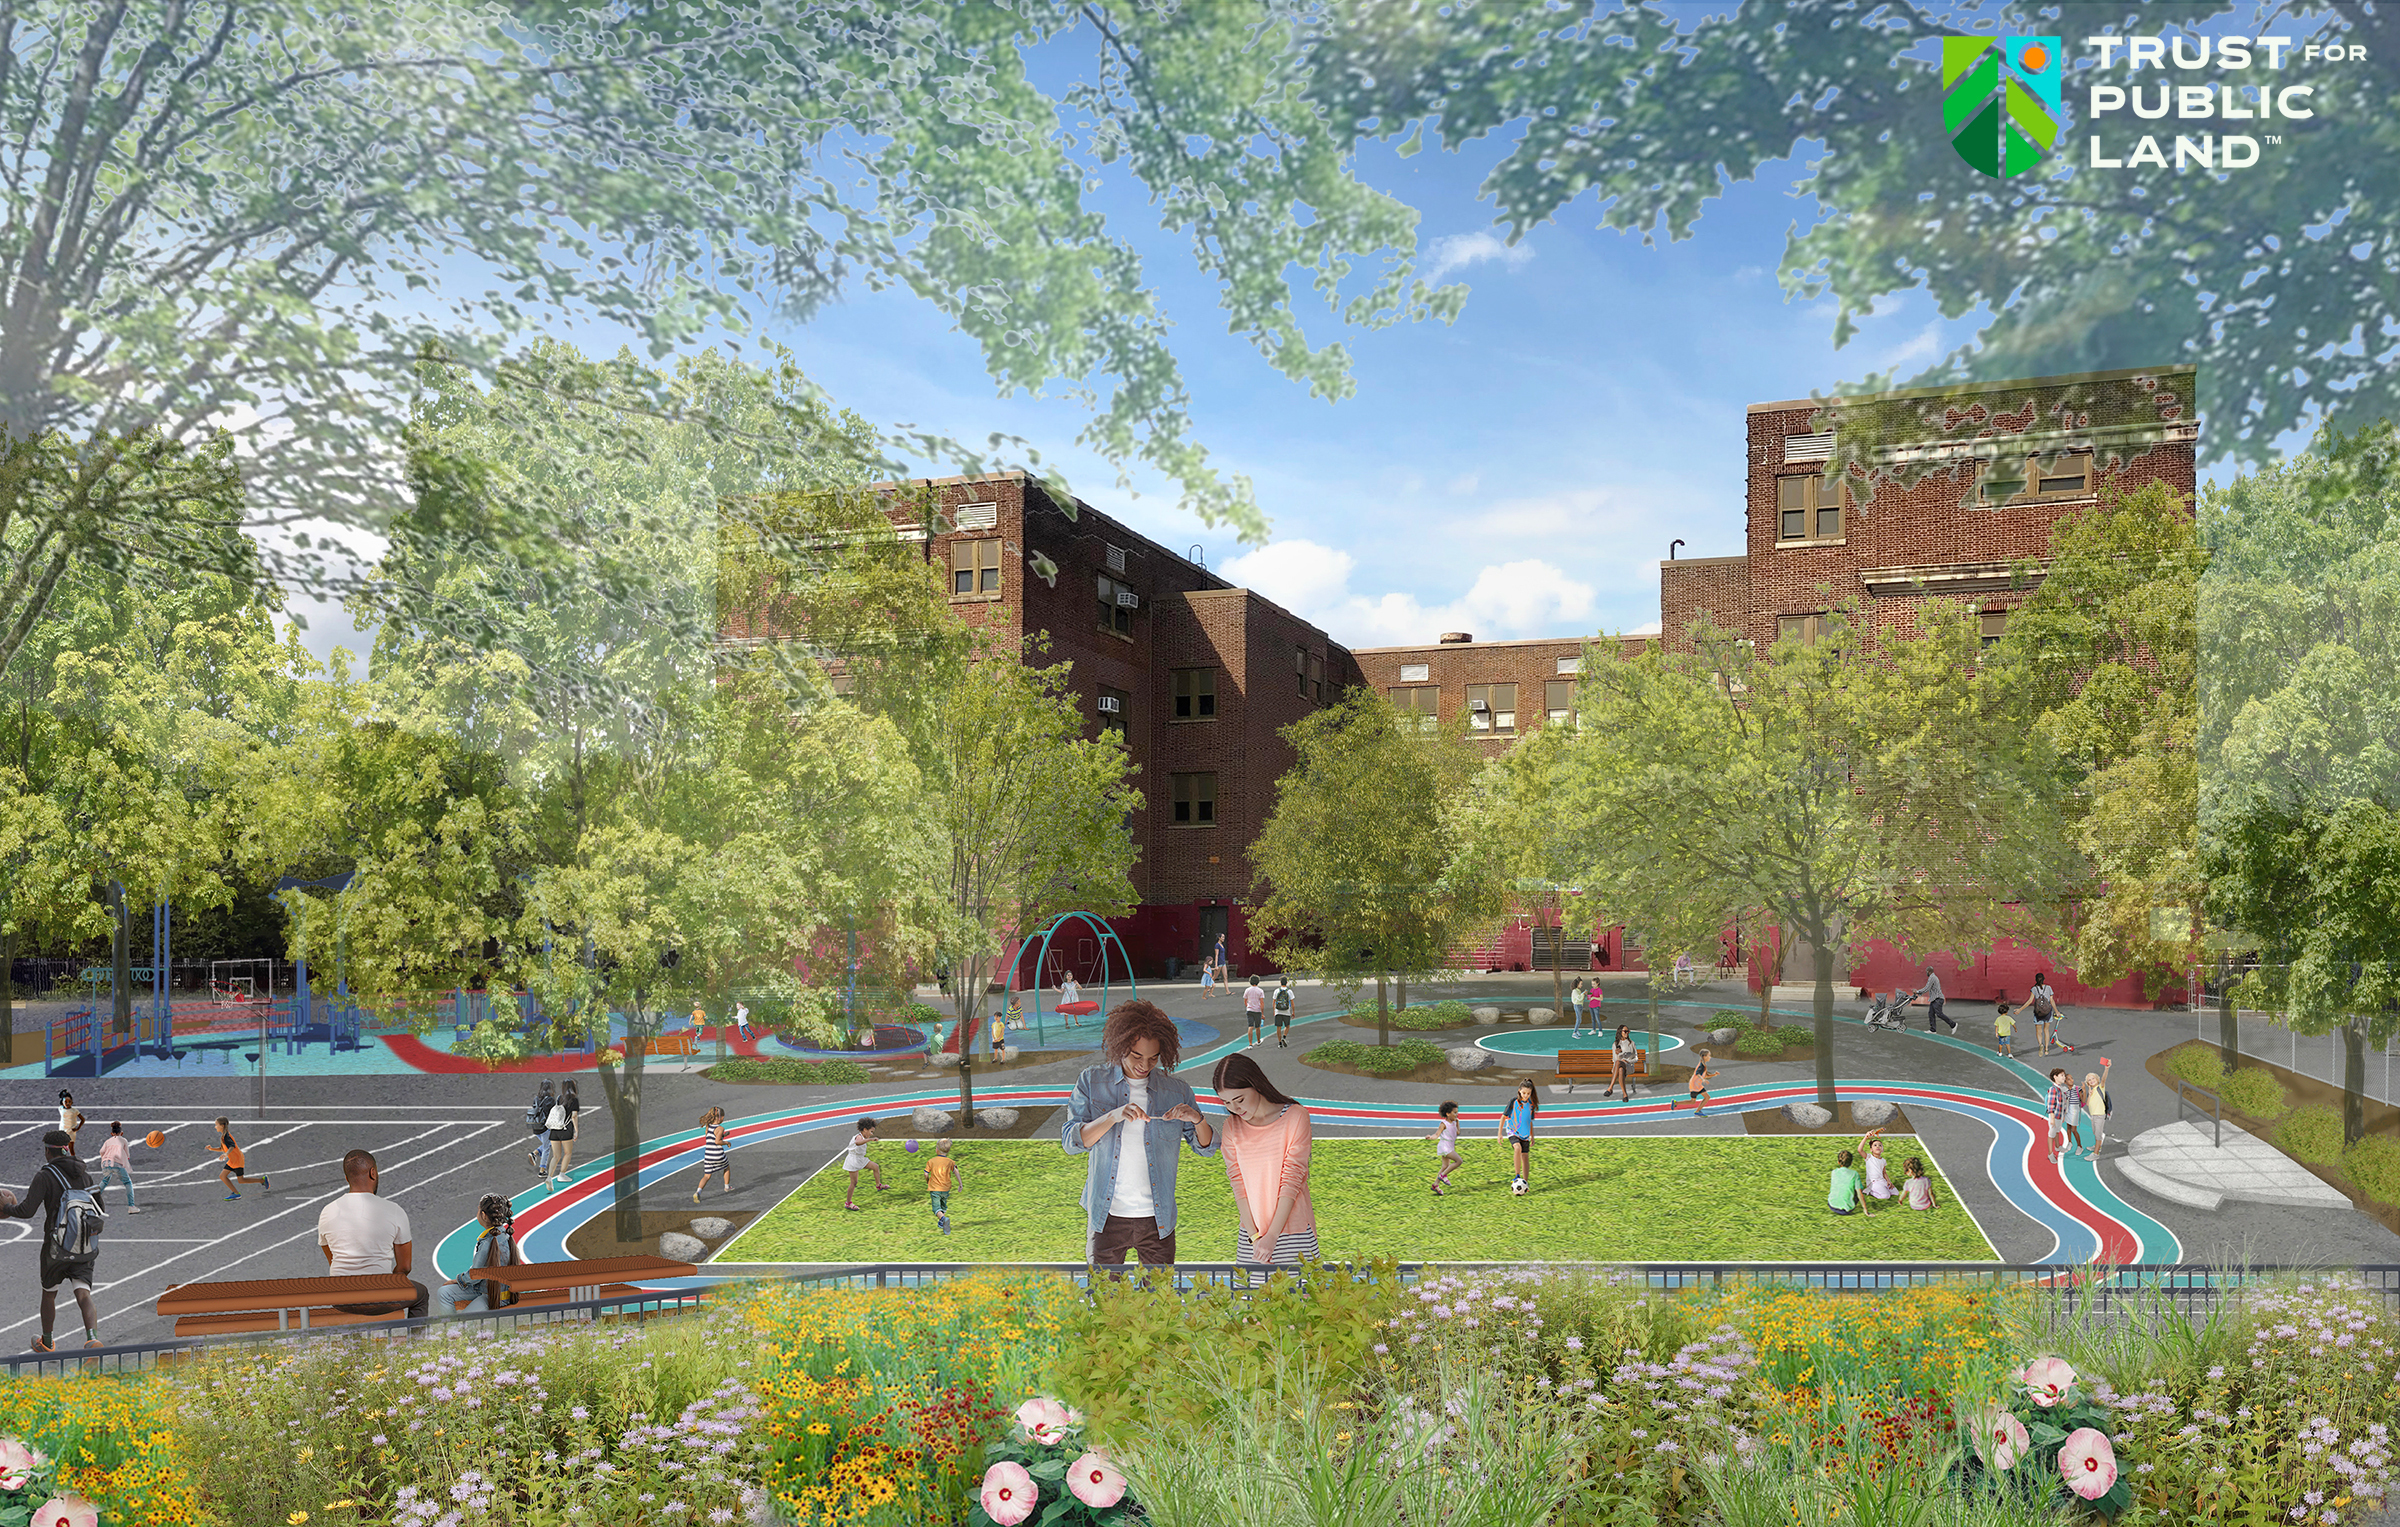 an illustration of the planned improvments to the Bregy Elementary schoolyard shows the building in the background nearly obscured by trees, a rain garden filled with native flowers in the foreground, and space between filled with children enjoying permeable basketball courts, playgrounds, and pathways, and a large grassy area.